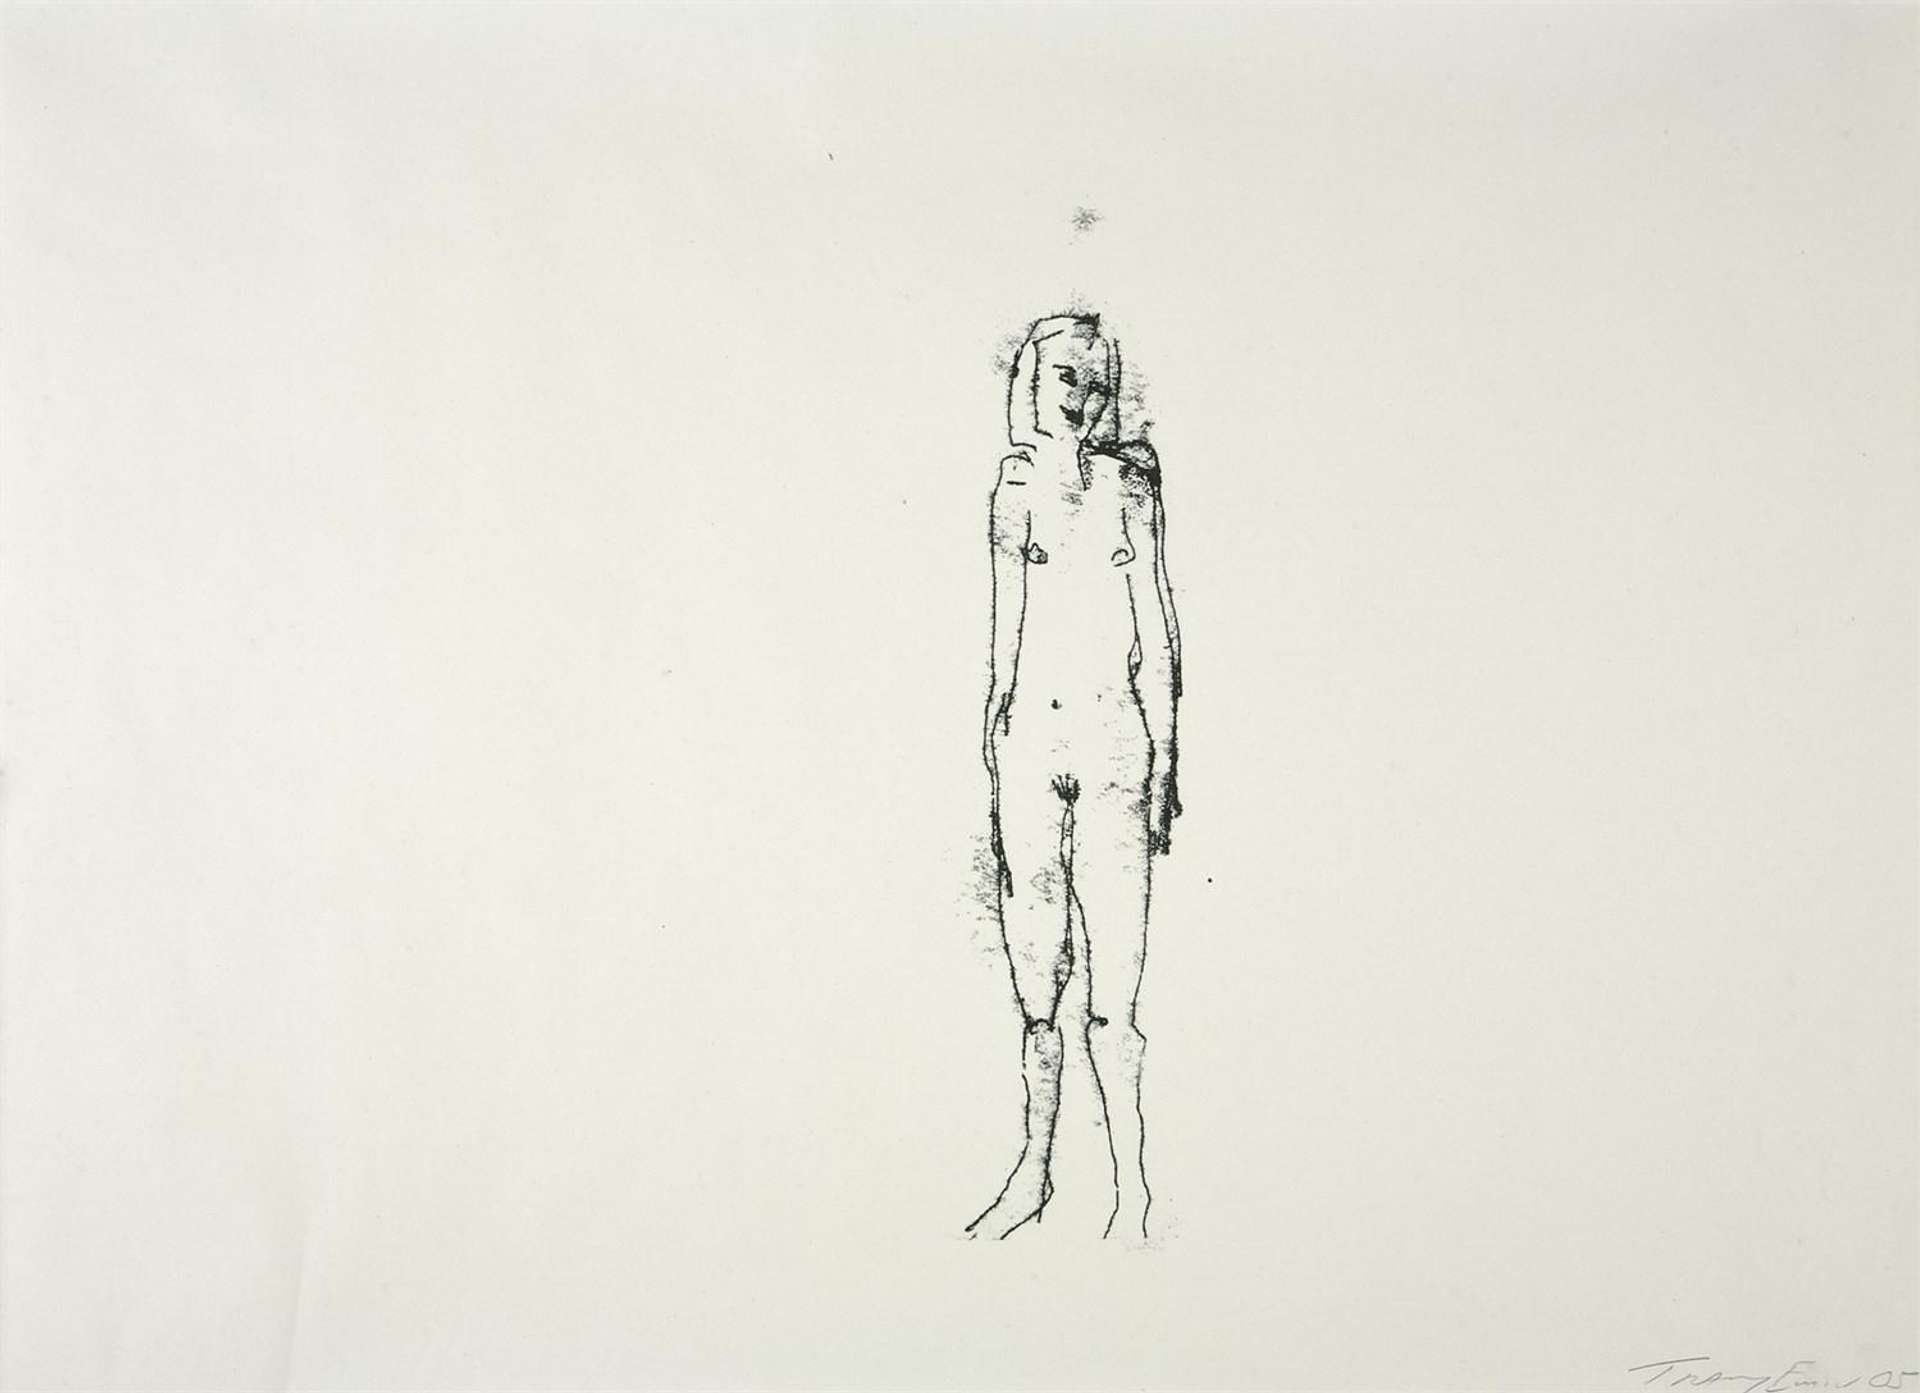 Tracey Emin: When I Think About Sex - Signed Print